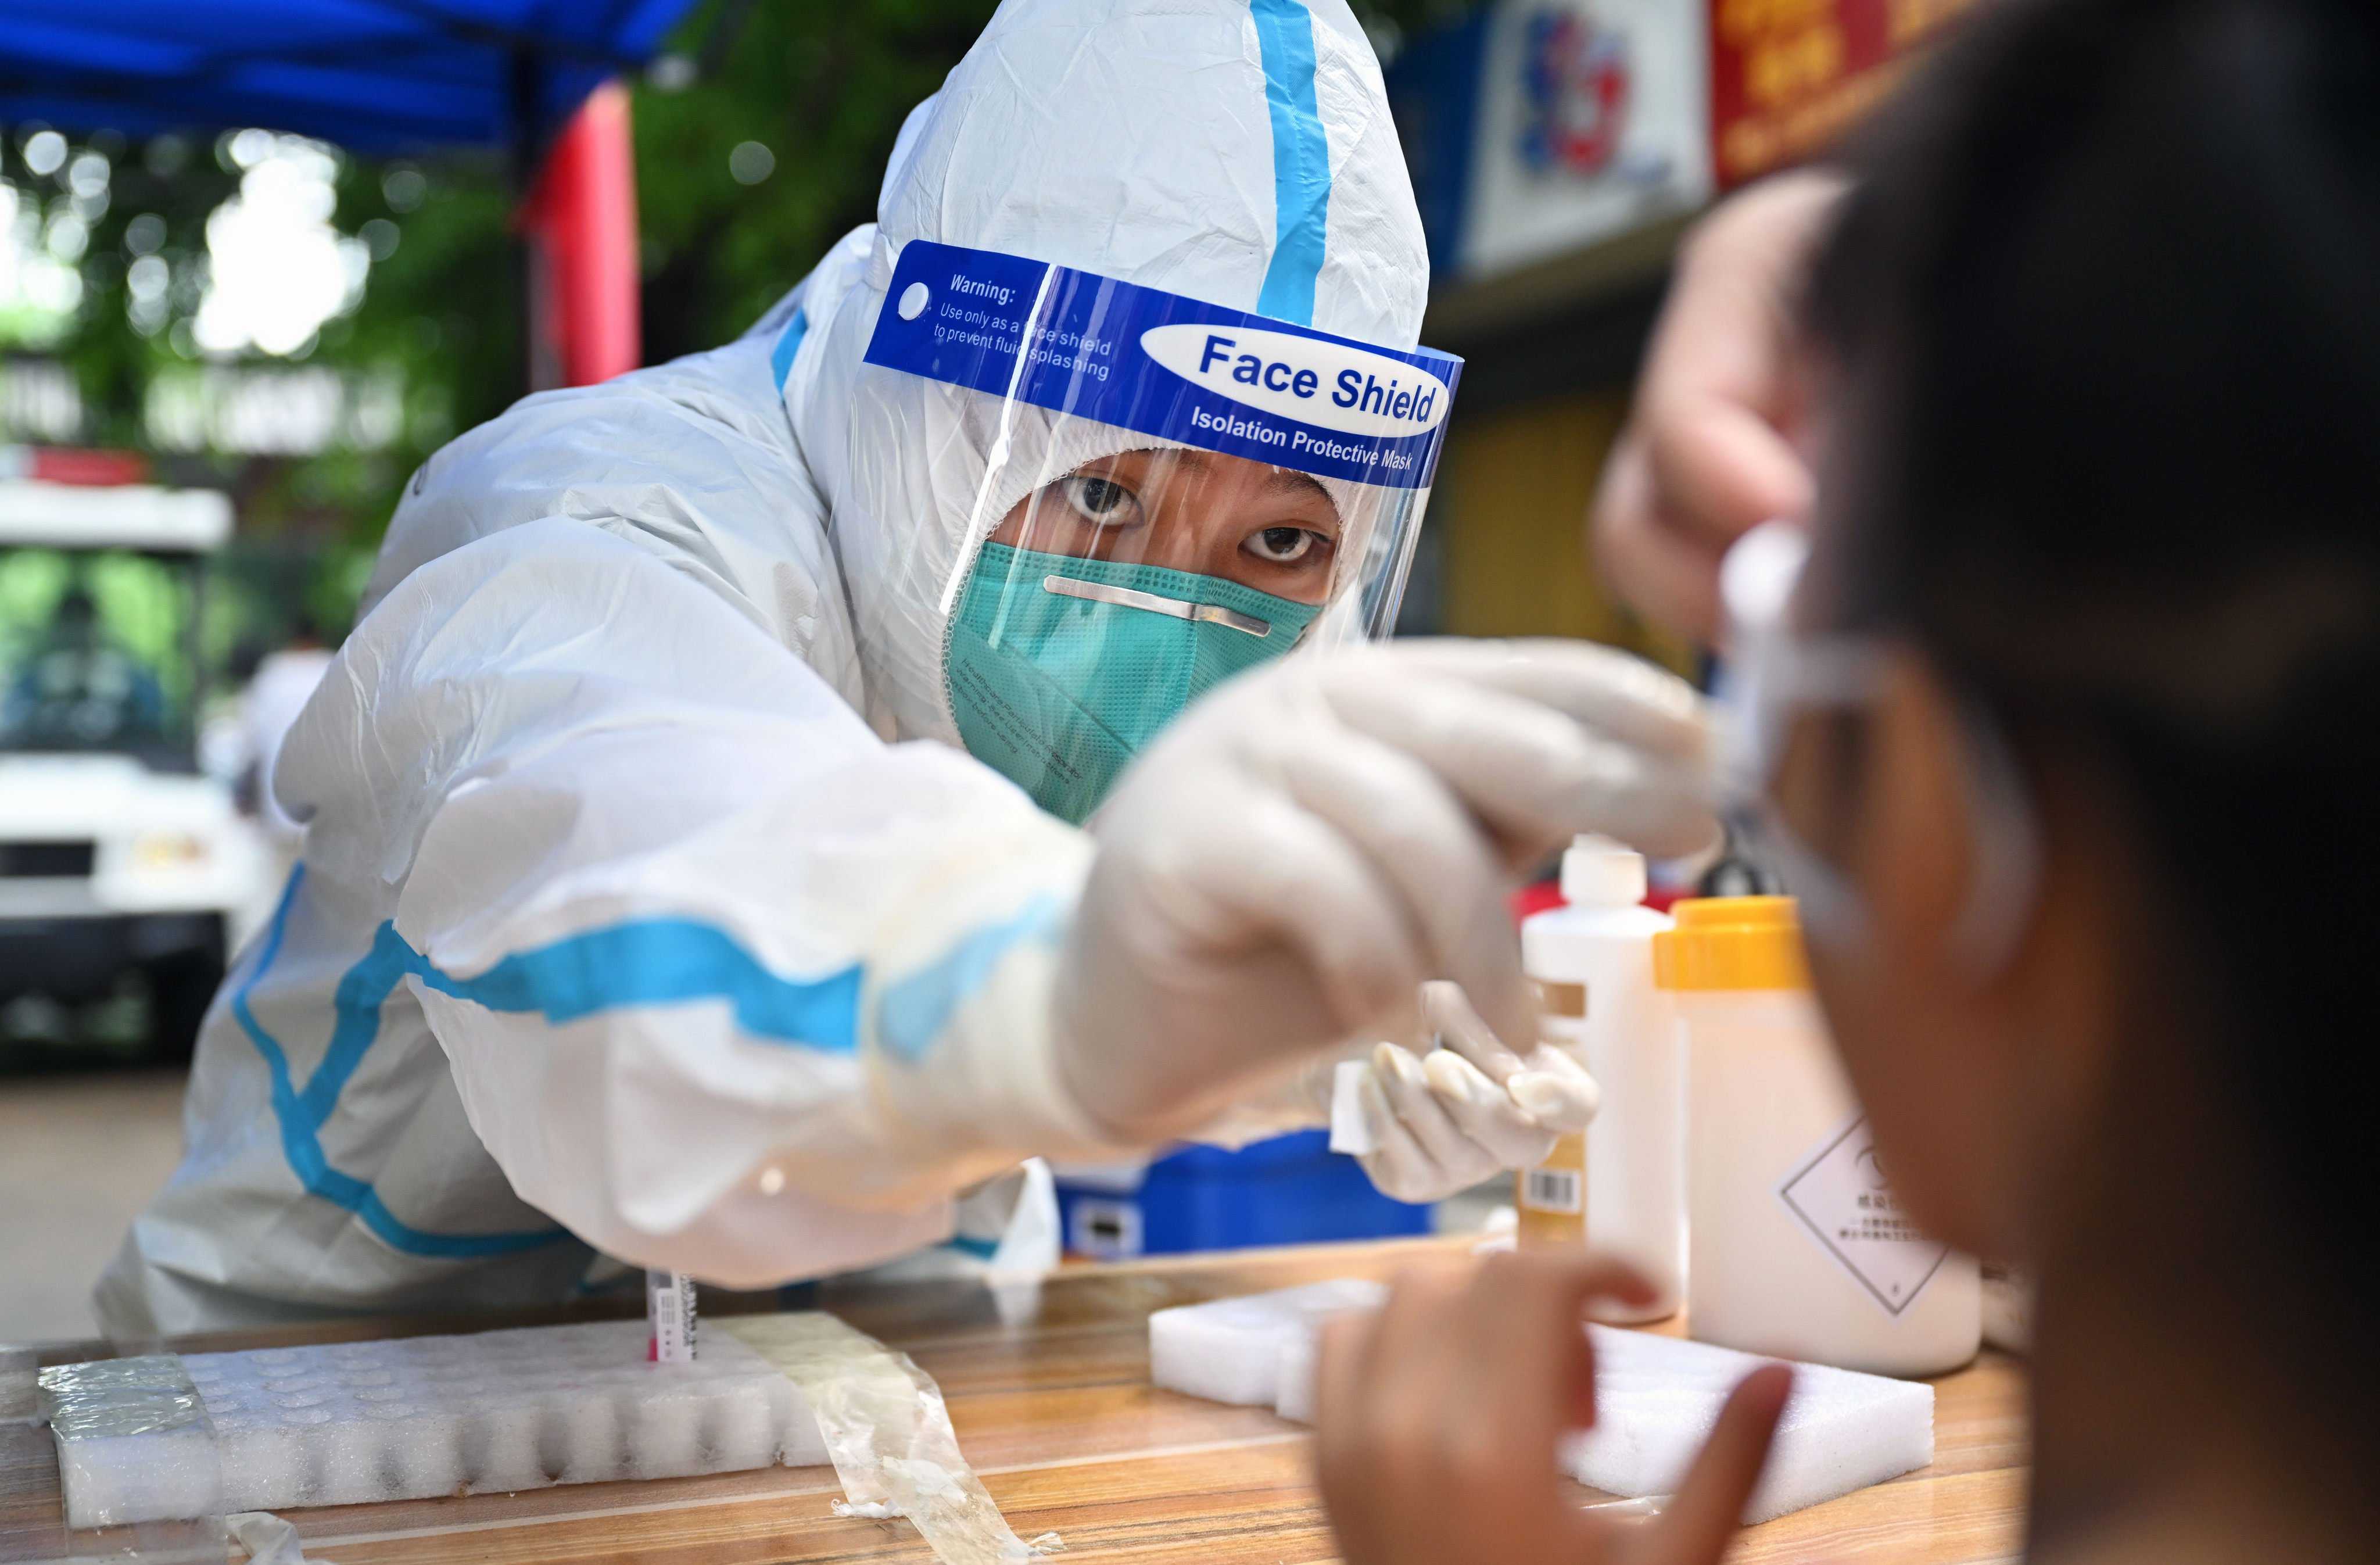 A medical worker takes a swab sample for Covid-19 testing from a person in Sanya, Hainan province, on Thursday. Photo: Xinhua